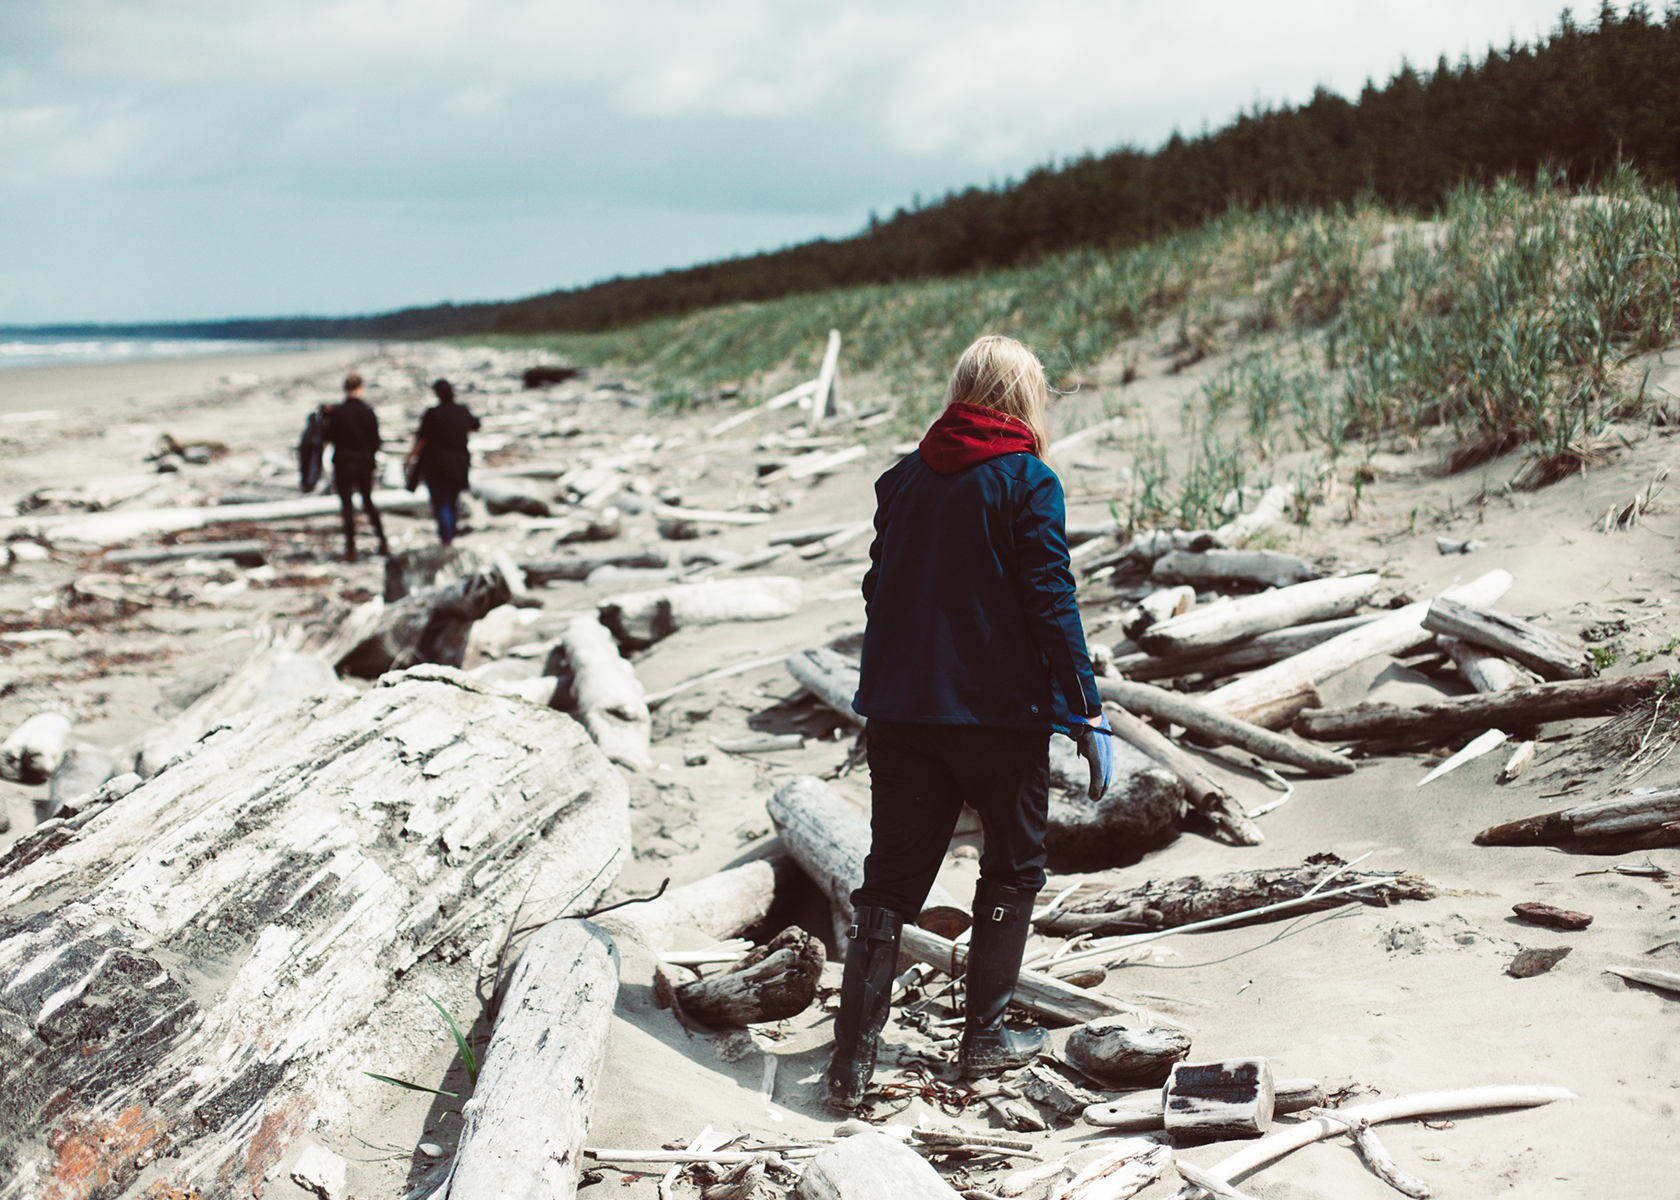 A view from behind of a woman dressed in cold weather clothing and boots walking on a beach covered in driftwood with two firther people walking in the background